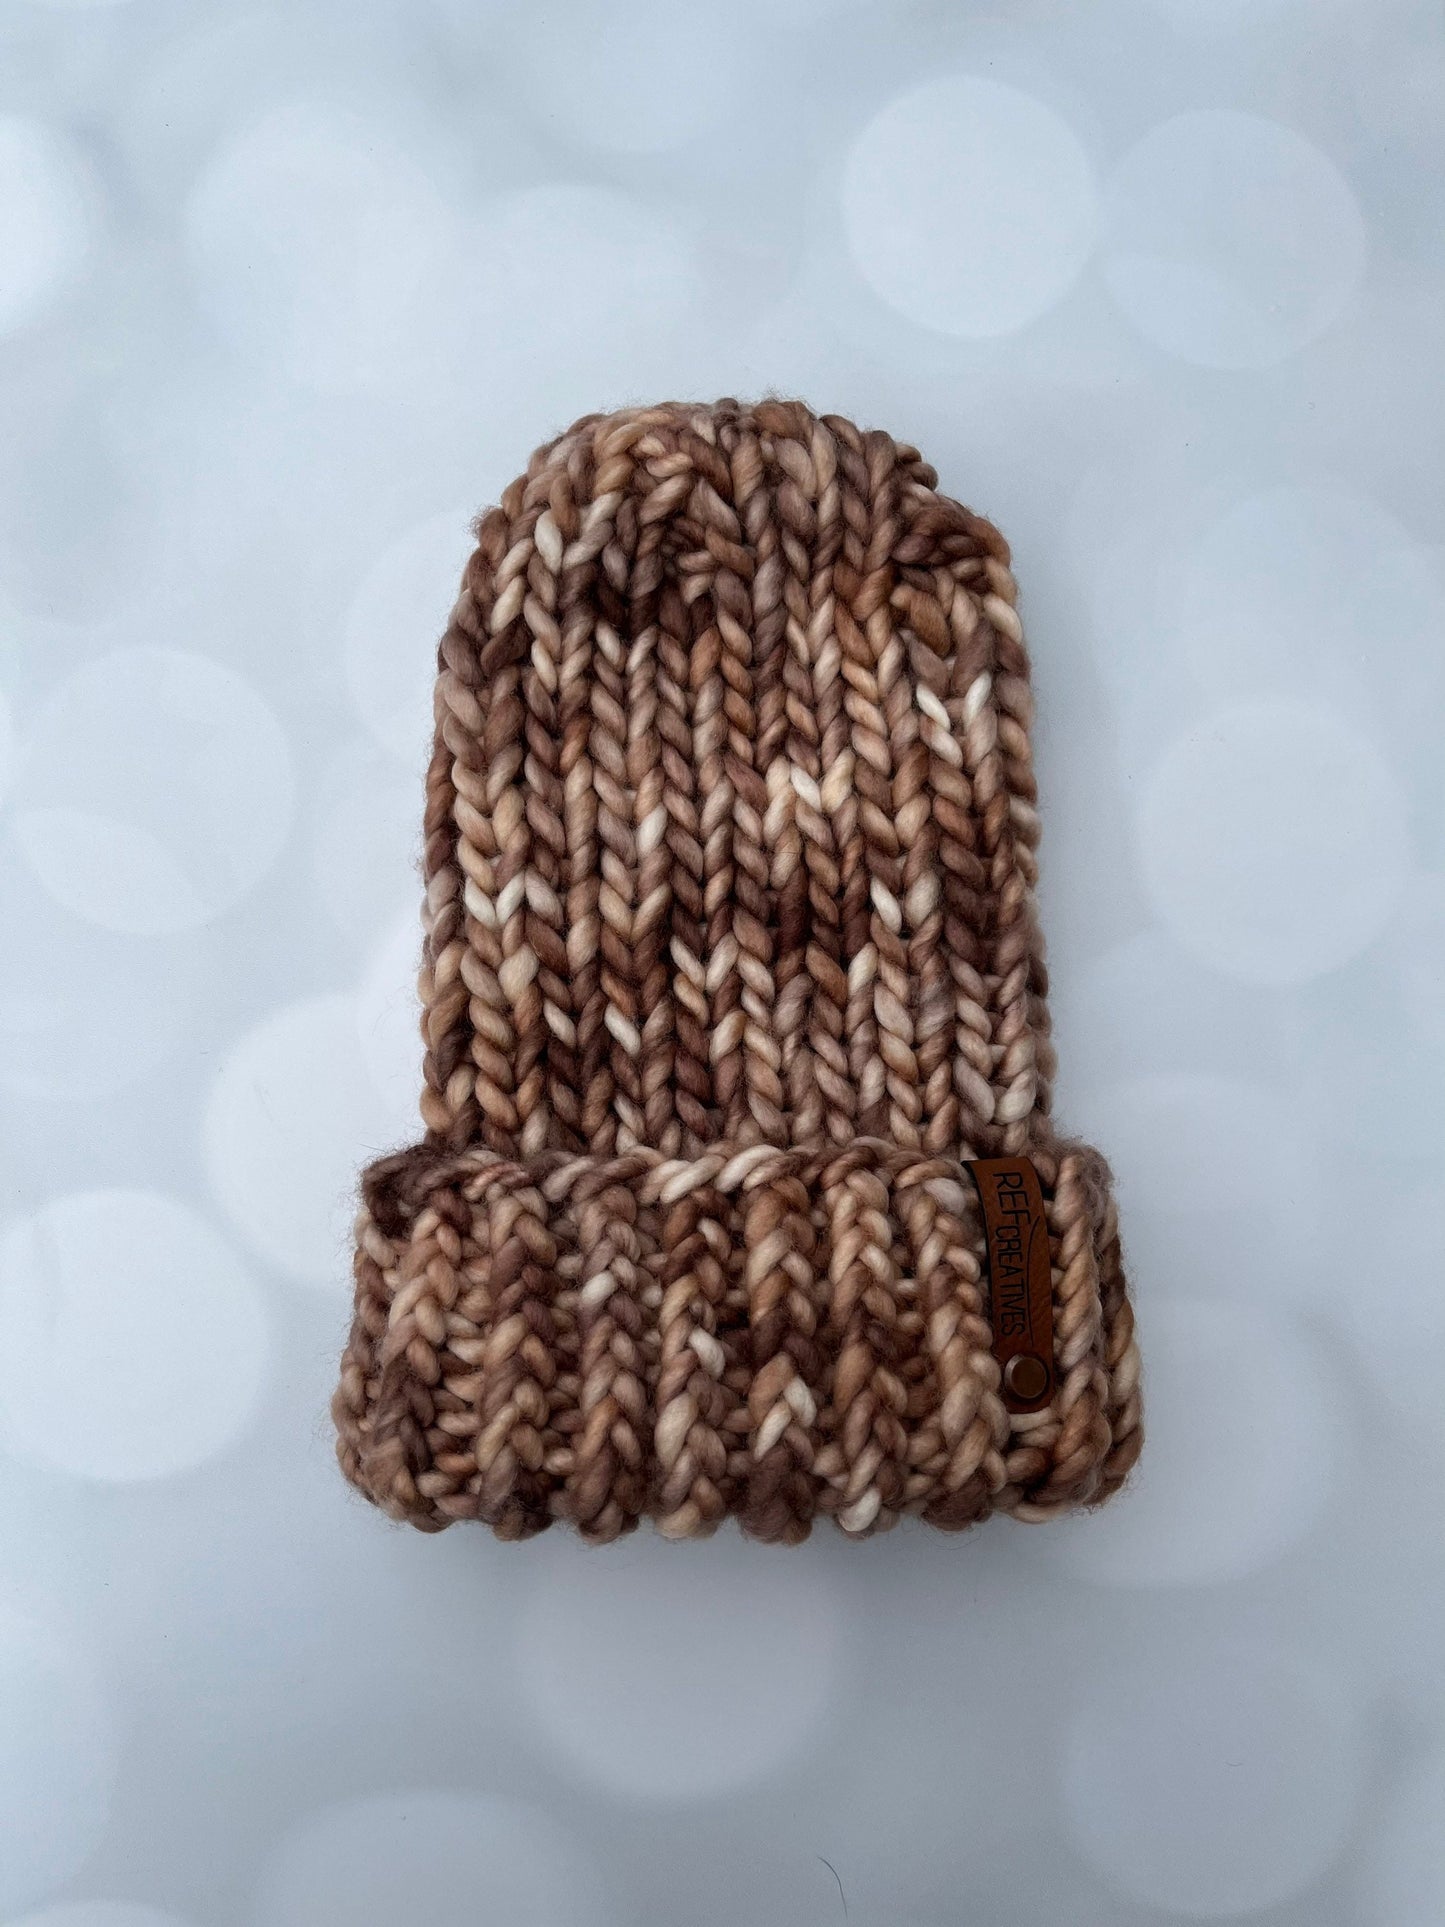 Luxury Brown Merino Wool Knit Hat - Wildwood Beanie Hand Knit Hat with Hand Dyed Yarn